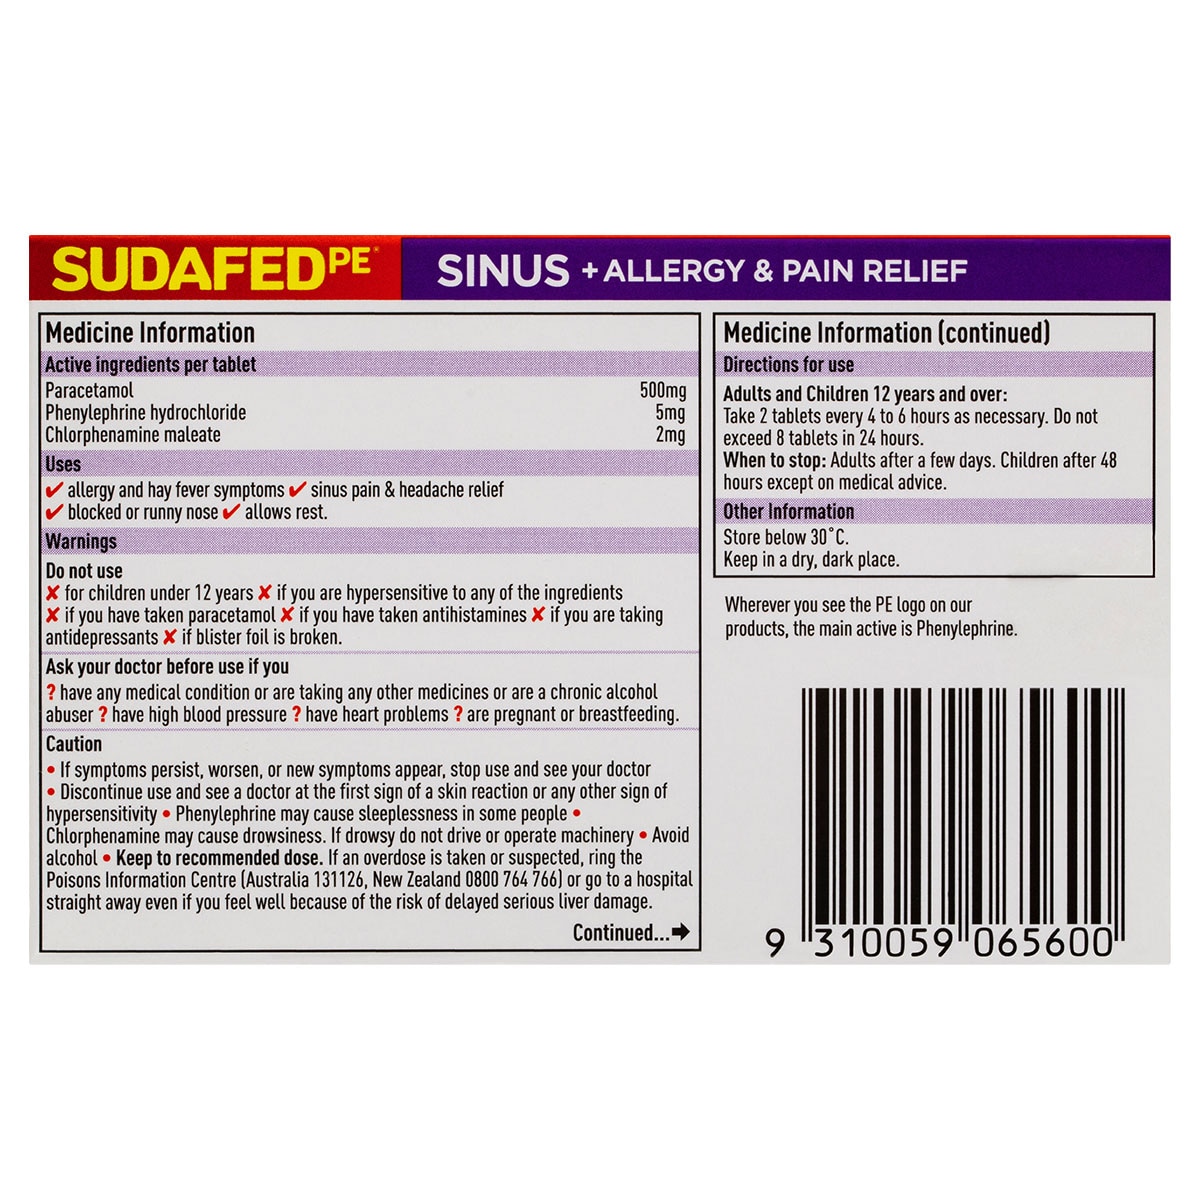 Sudafed PE Sinus + Allergy & Pain Relief 24 Tablets